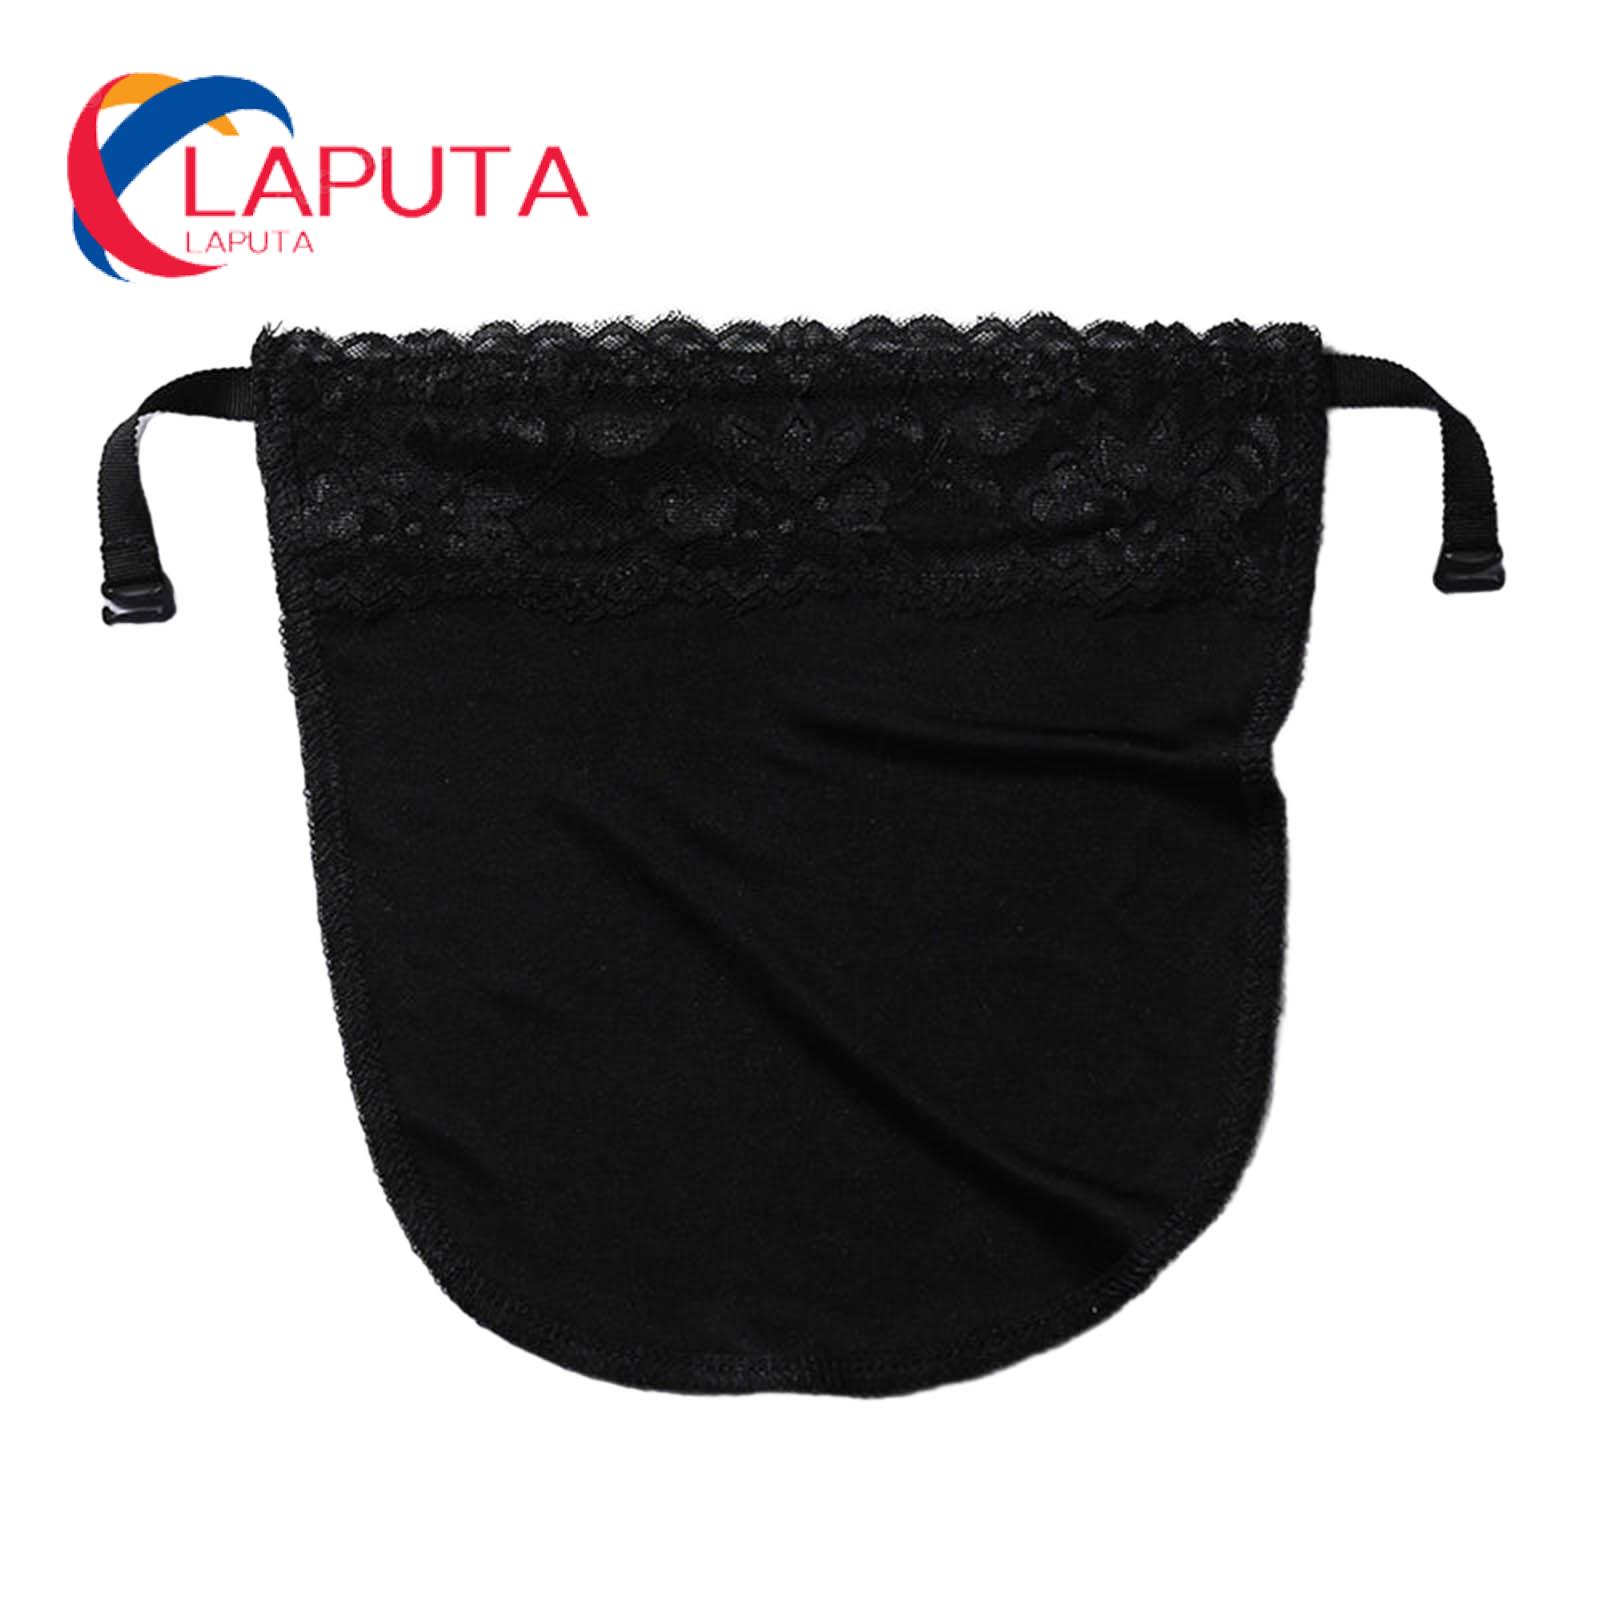 Anti-exposuretube Top Breathable Lace Chest Cover Anti-slip Modesty Panel  Inner Wear for Women Lace Tube Top